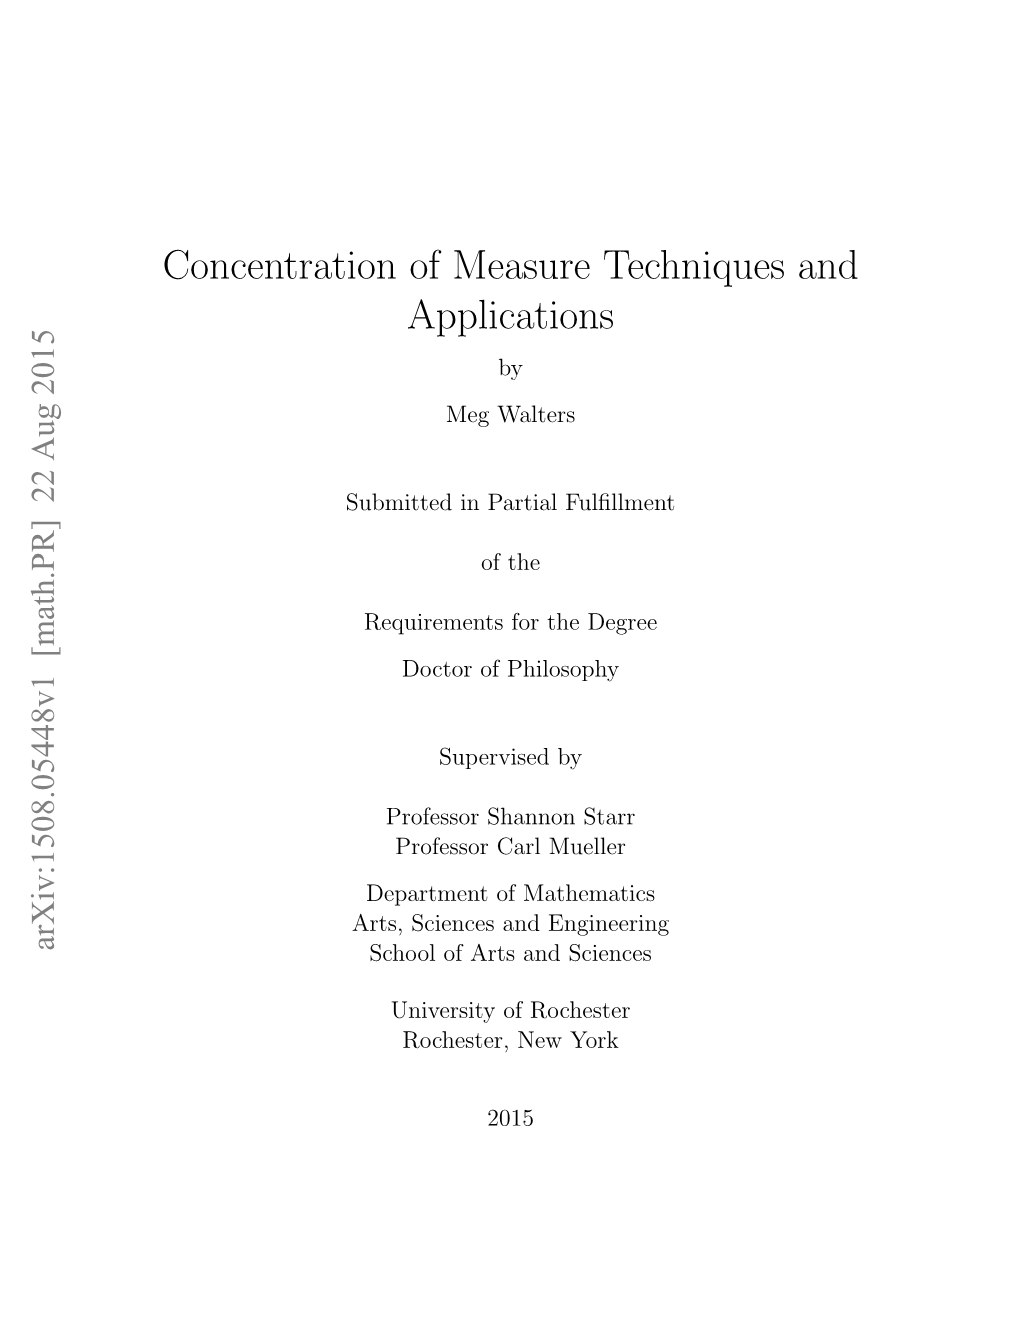 Concentration of Measure Techniques and Applications by Meg Walters